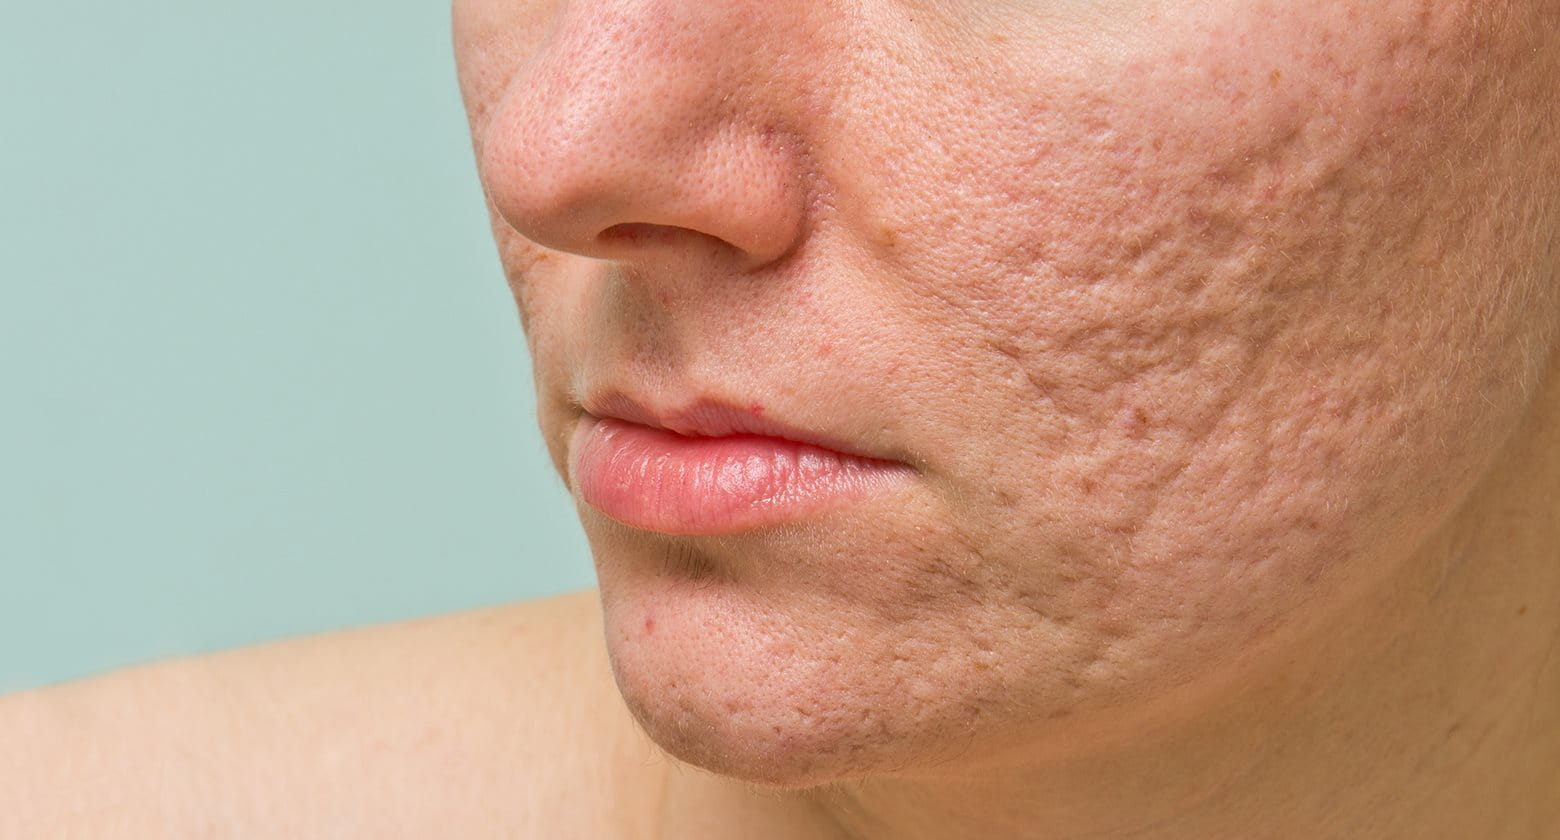 Treating and removing acne scars